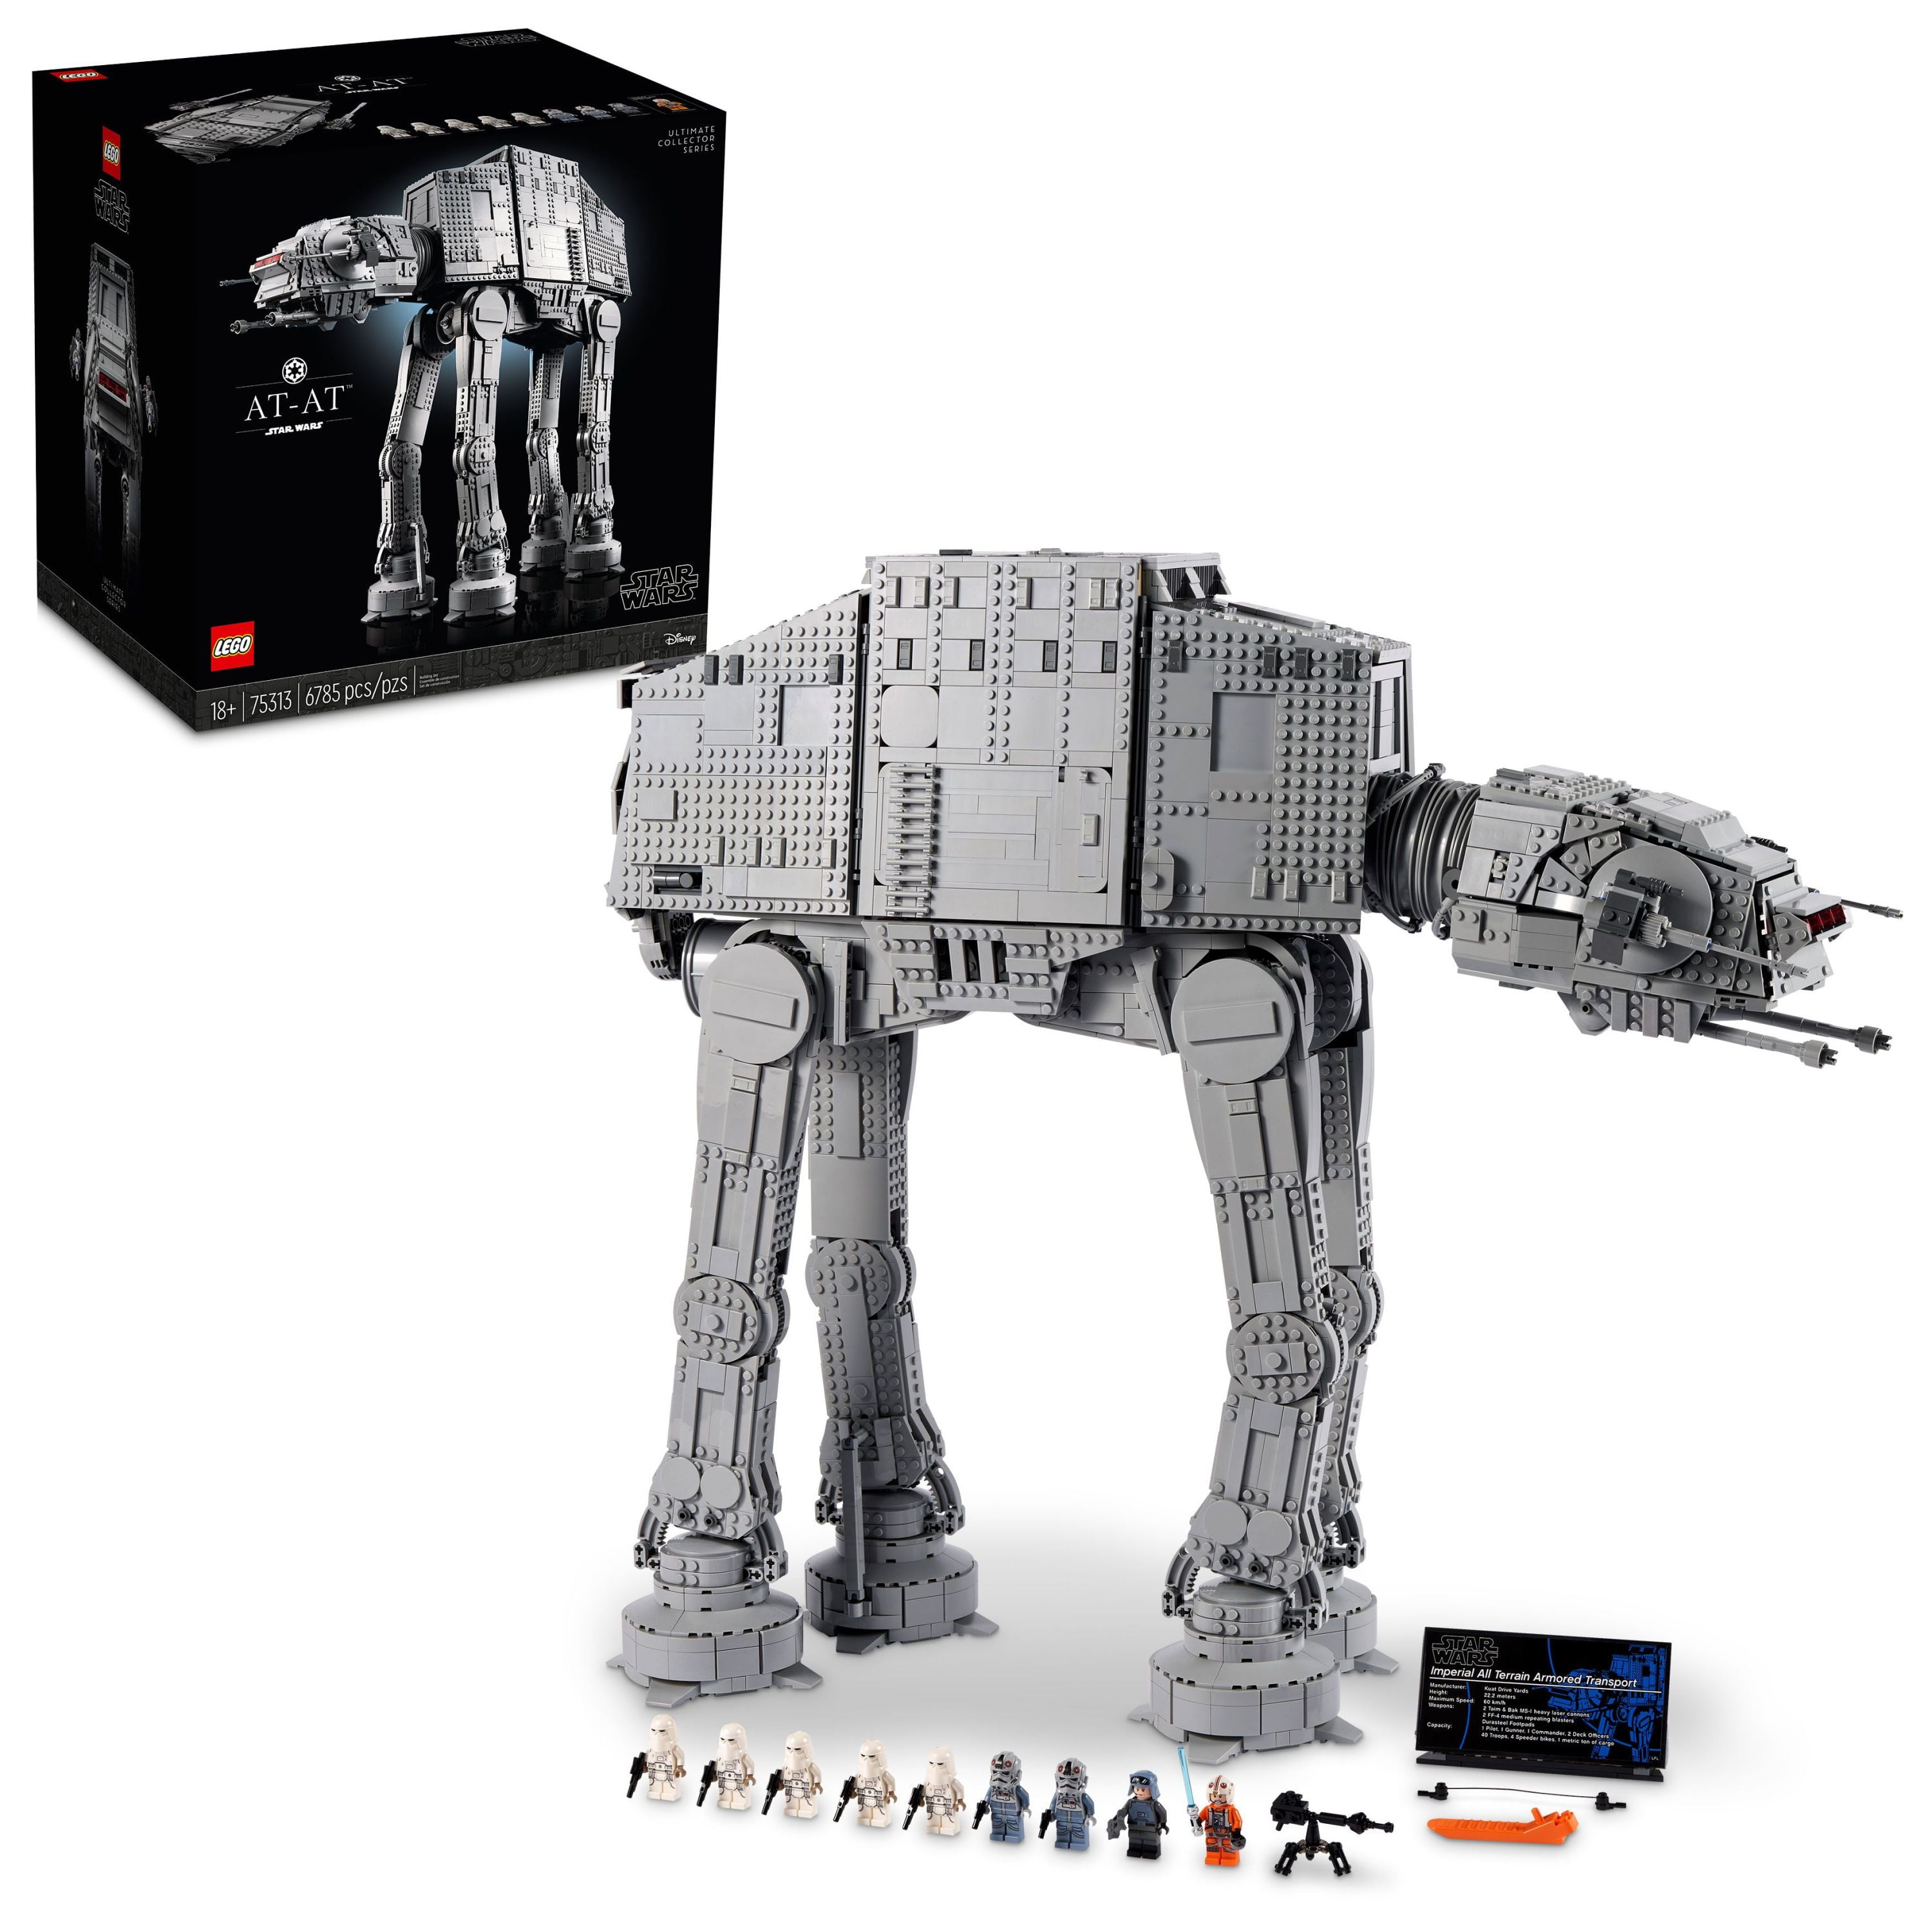 LEGO Star Wars AT-AT Walker 75313 Buildable Model, Collectible Set Adults, Ultimate Build and Display Set, 9 Minifigures including General Luke Skywalker, Snowtroopers and AT-AT Drivers -